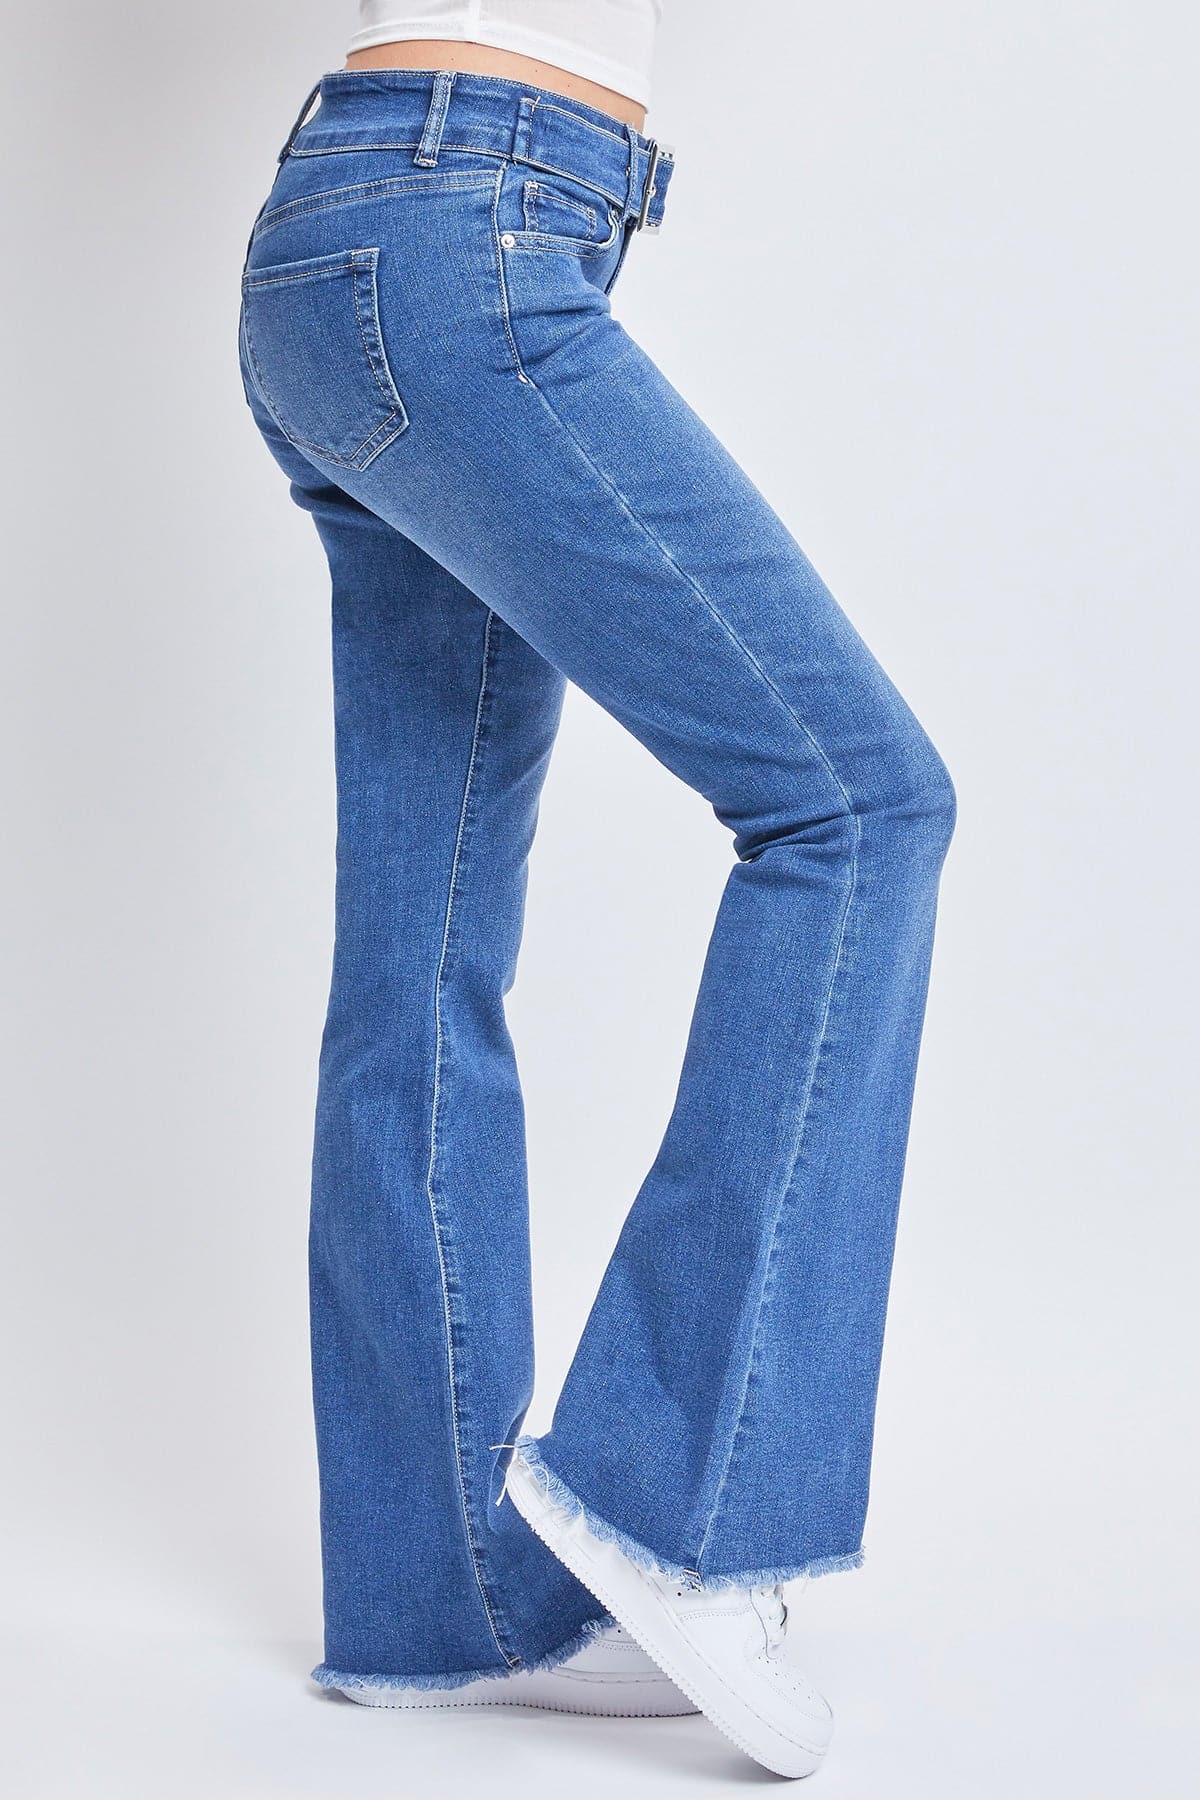 Women's Belted Flare Jeans